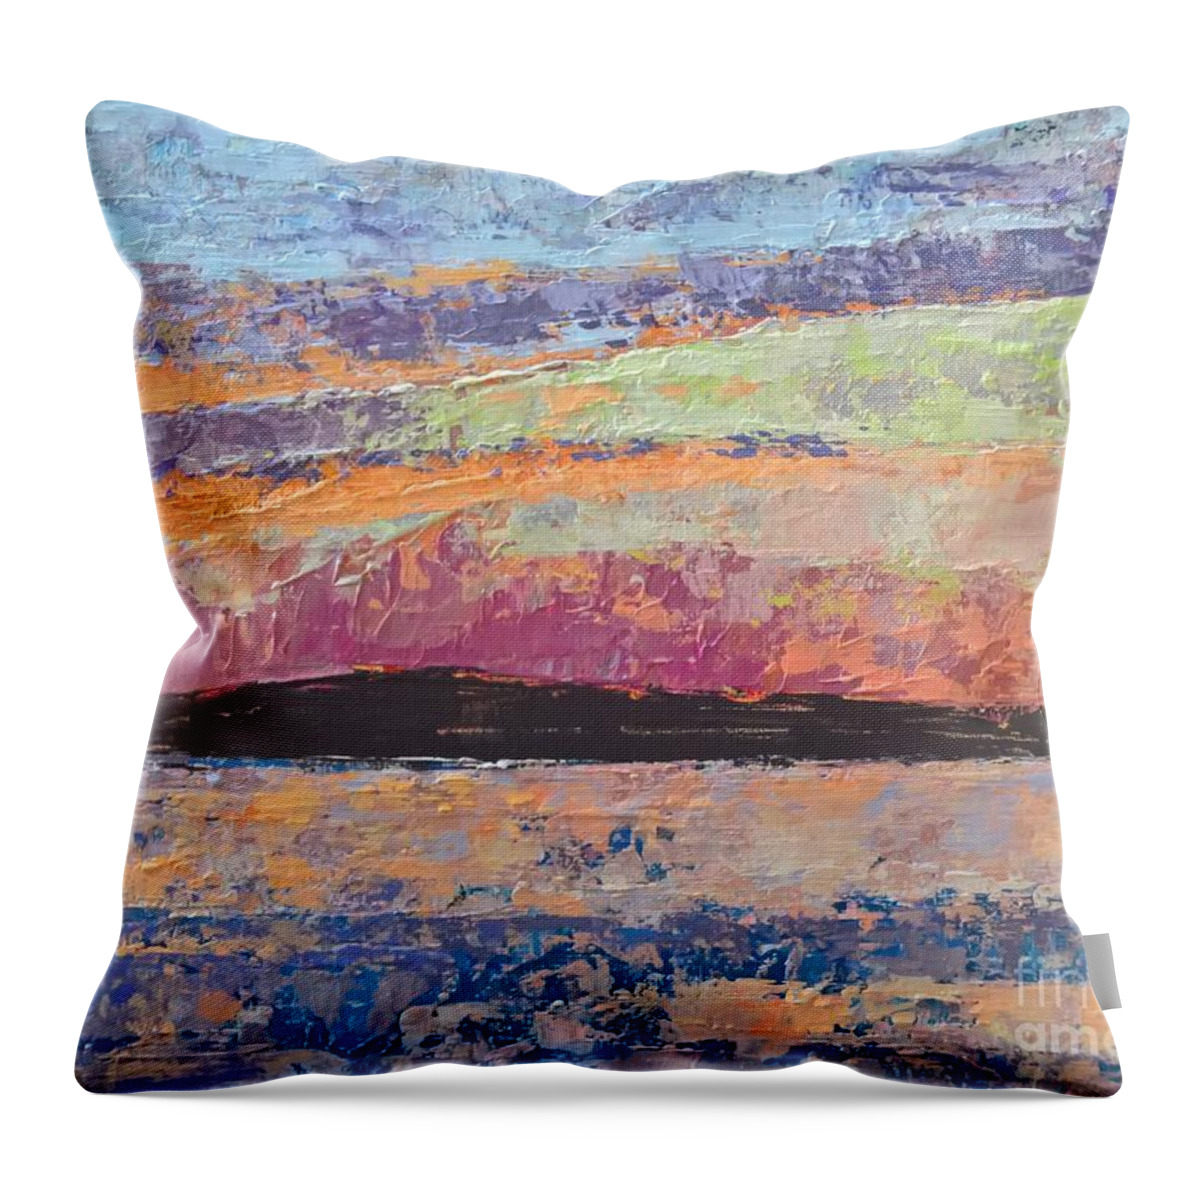 Original Acrylic Painting Throw Pillow featuring the painting Bass Lake, Michigan by Lisa Dionne